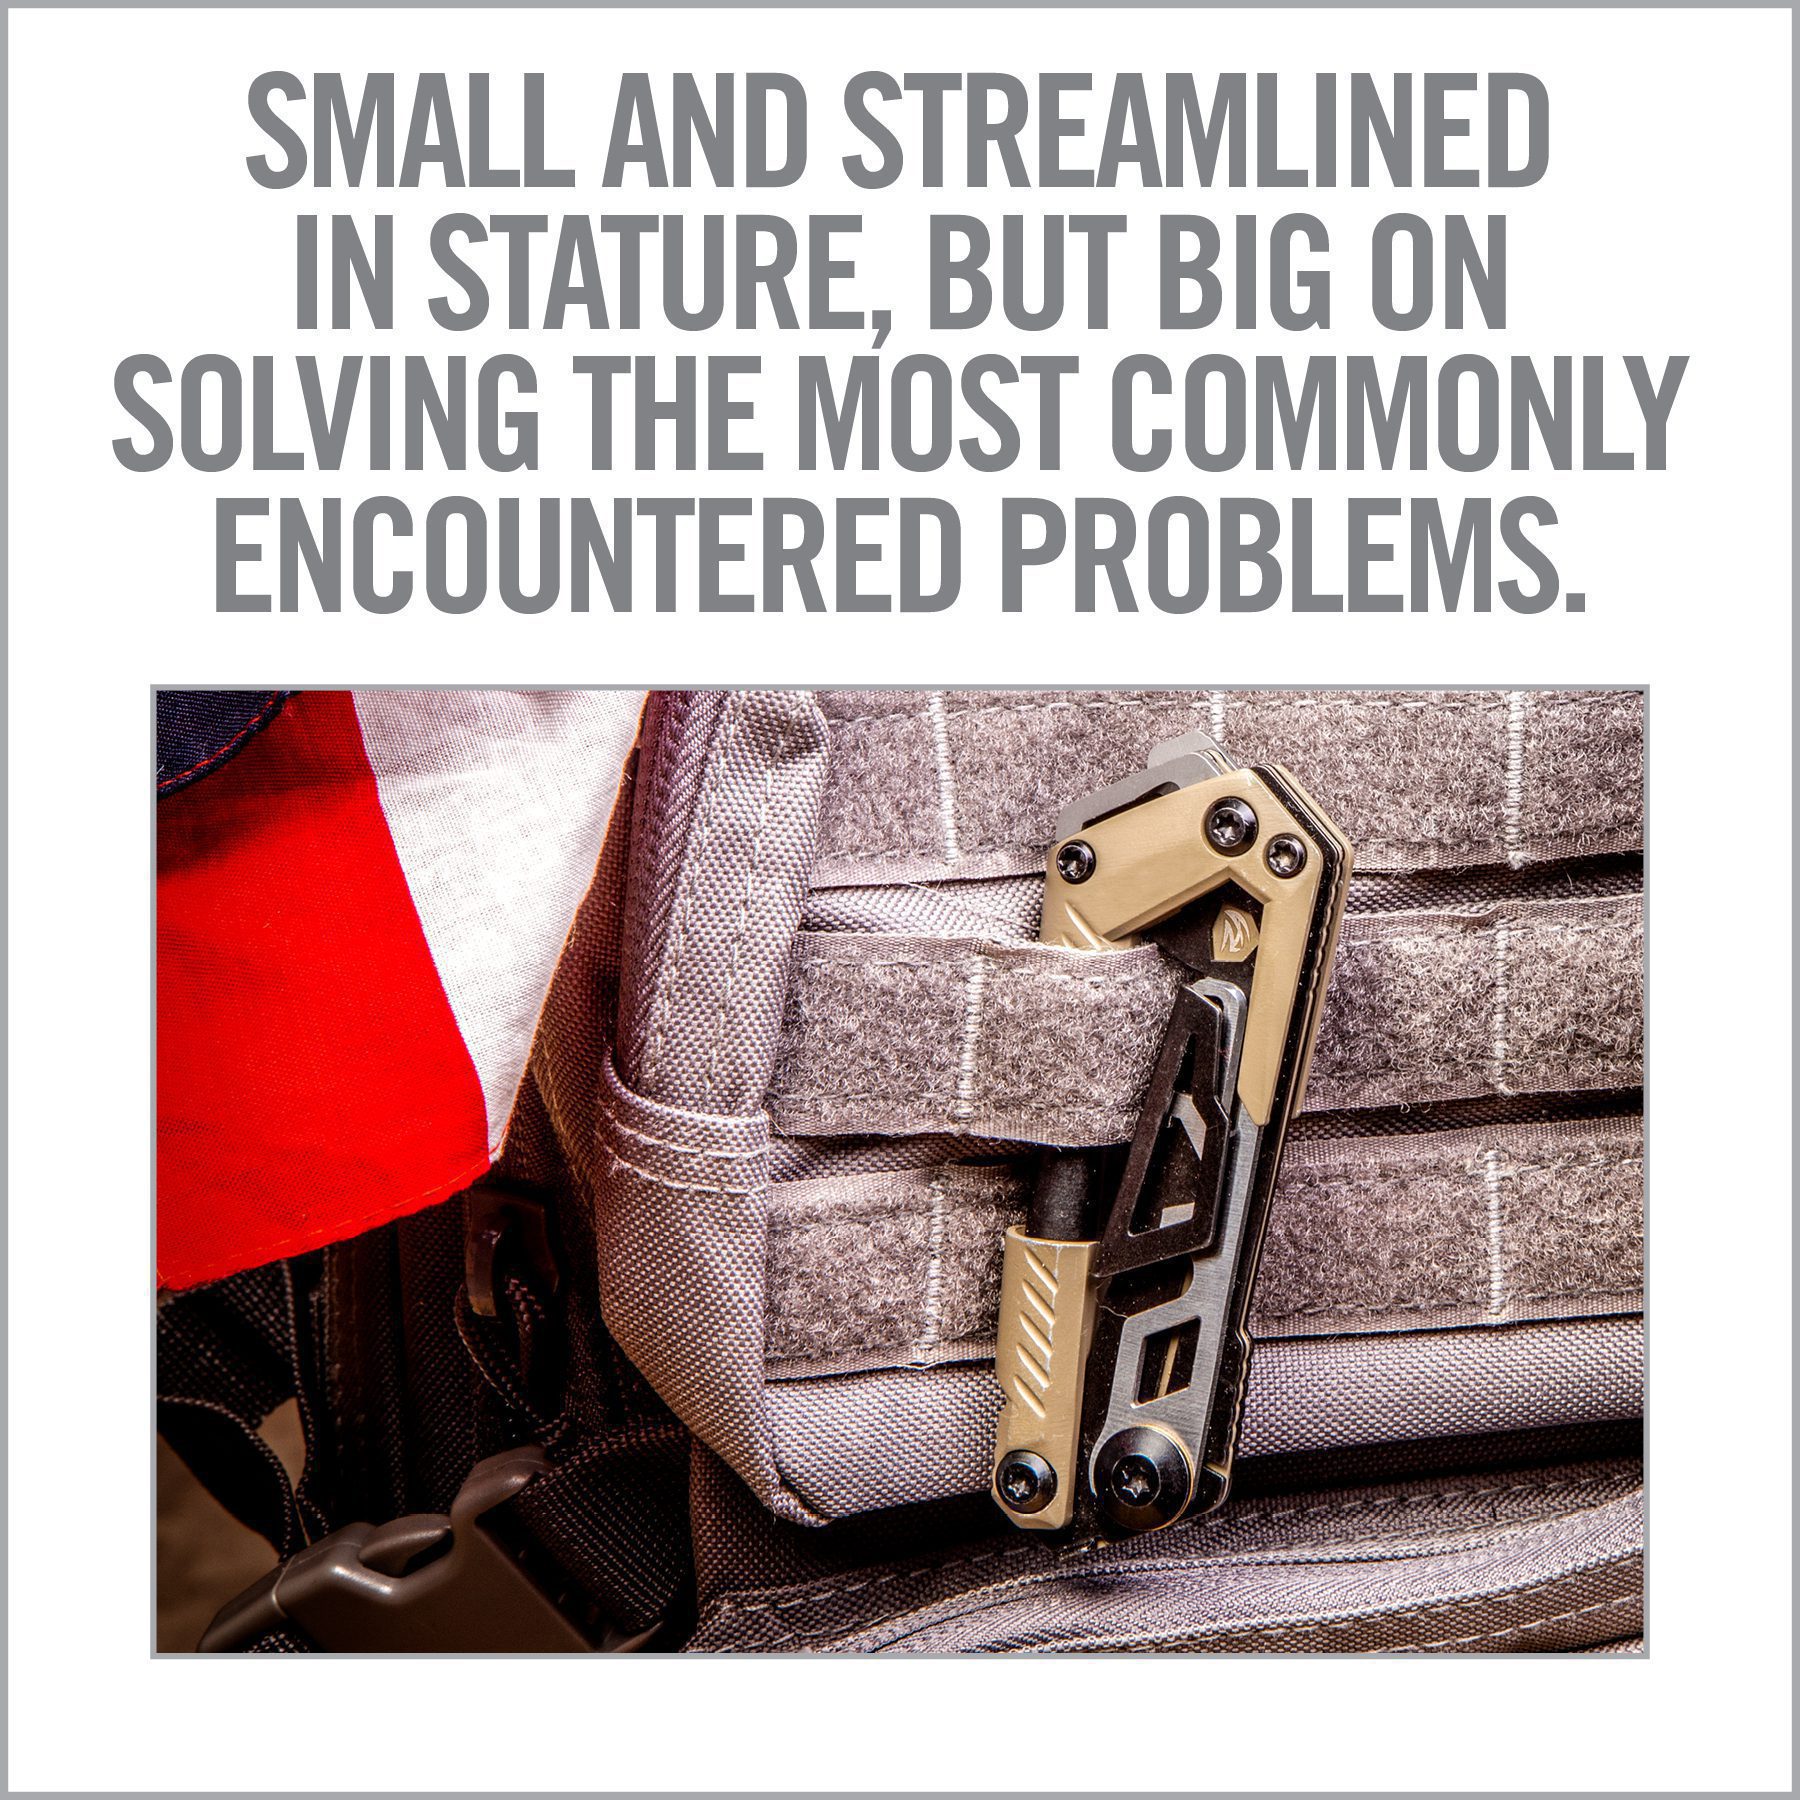 small and streamlined in statute, but big on solve the most commonly encounted problems